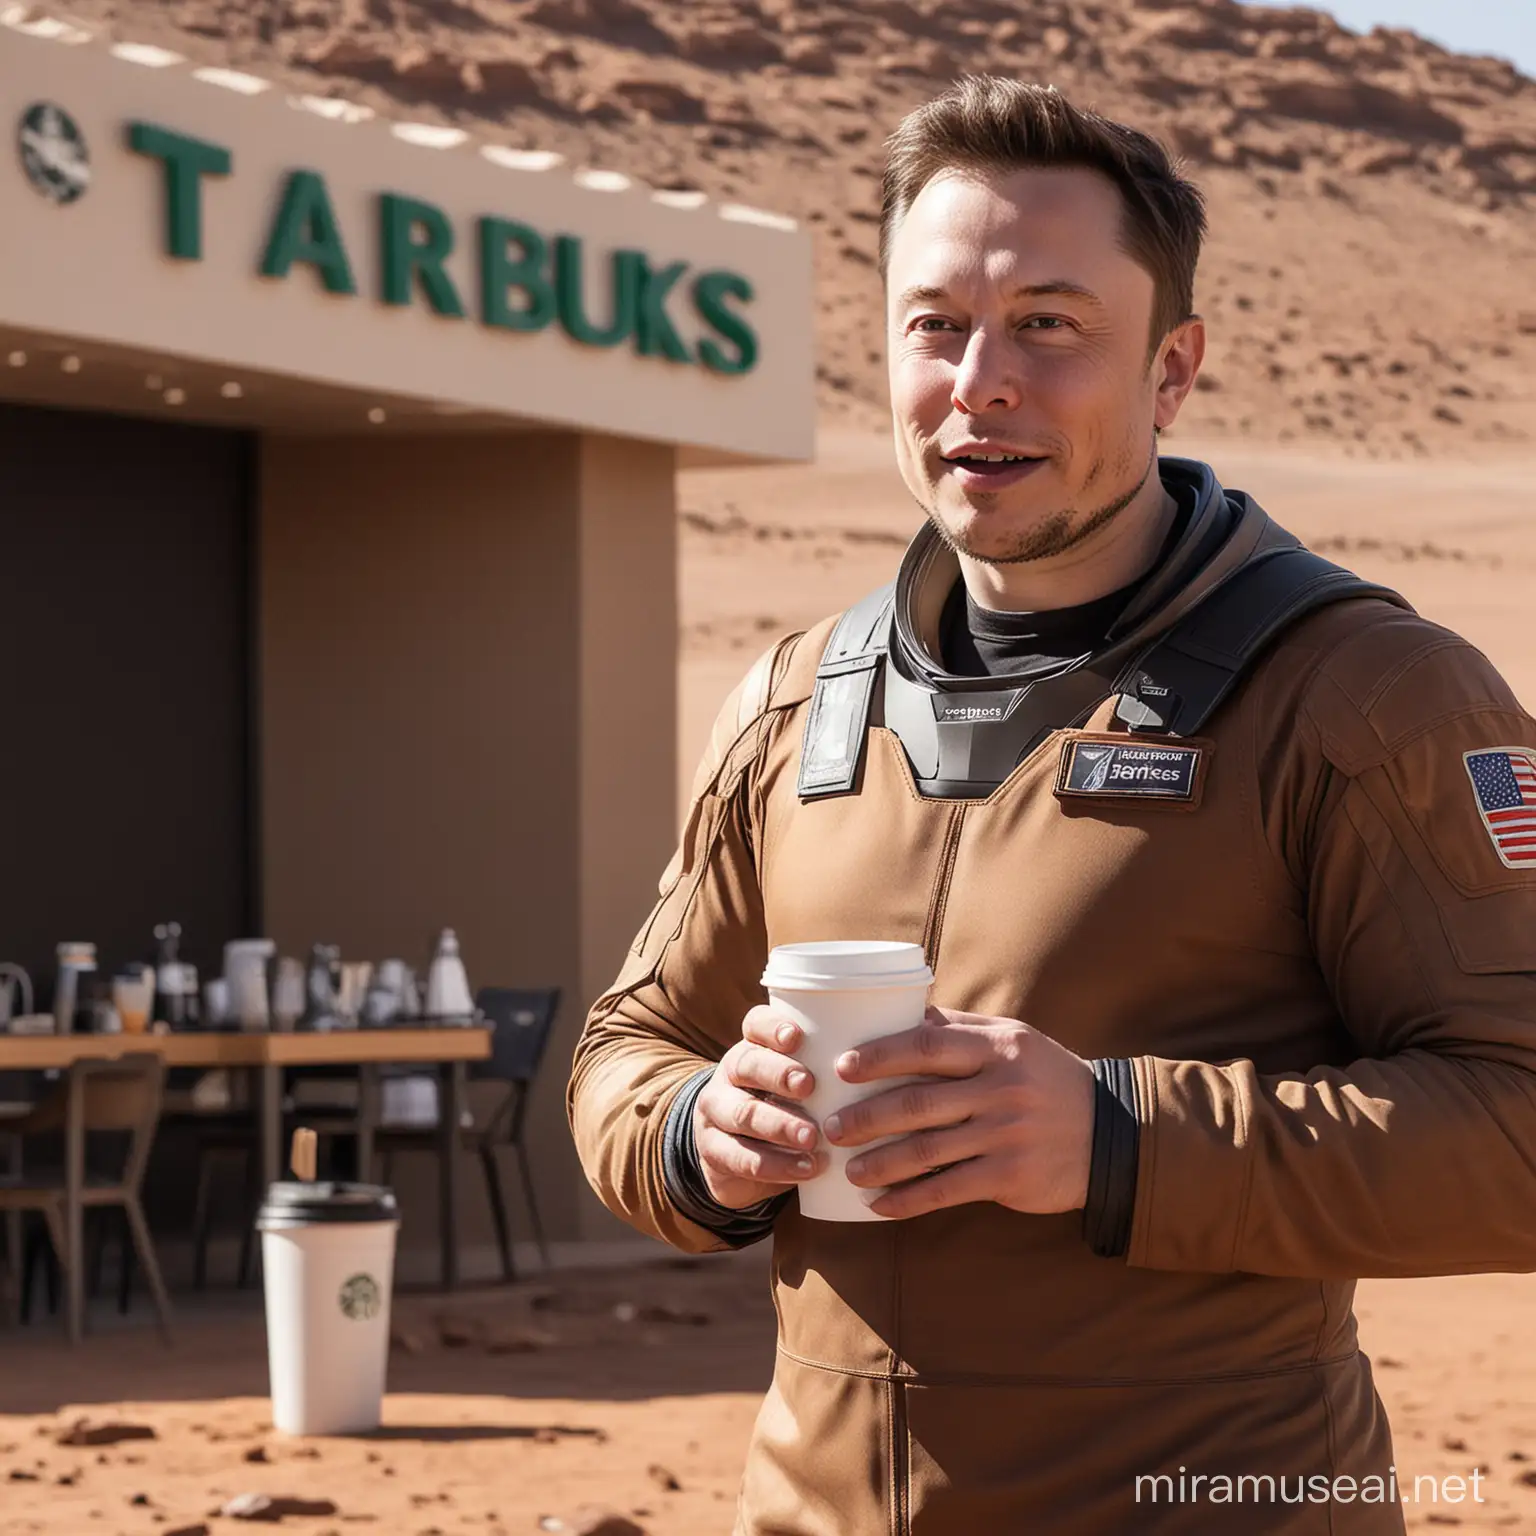 Elon Musk drinks coffee on Mars, in front of the first Martian Starbucks